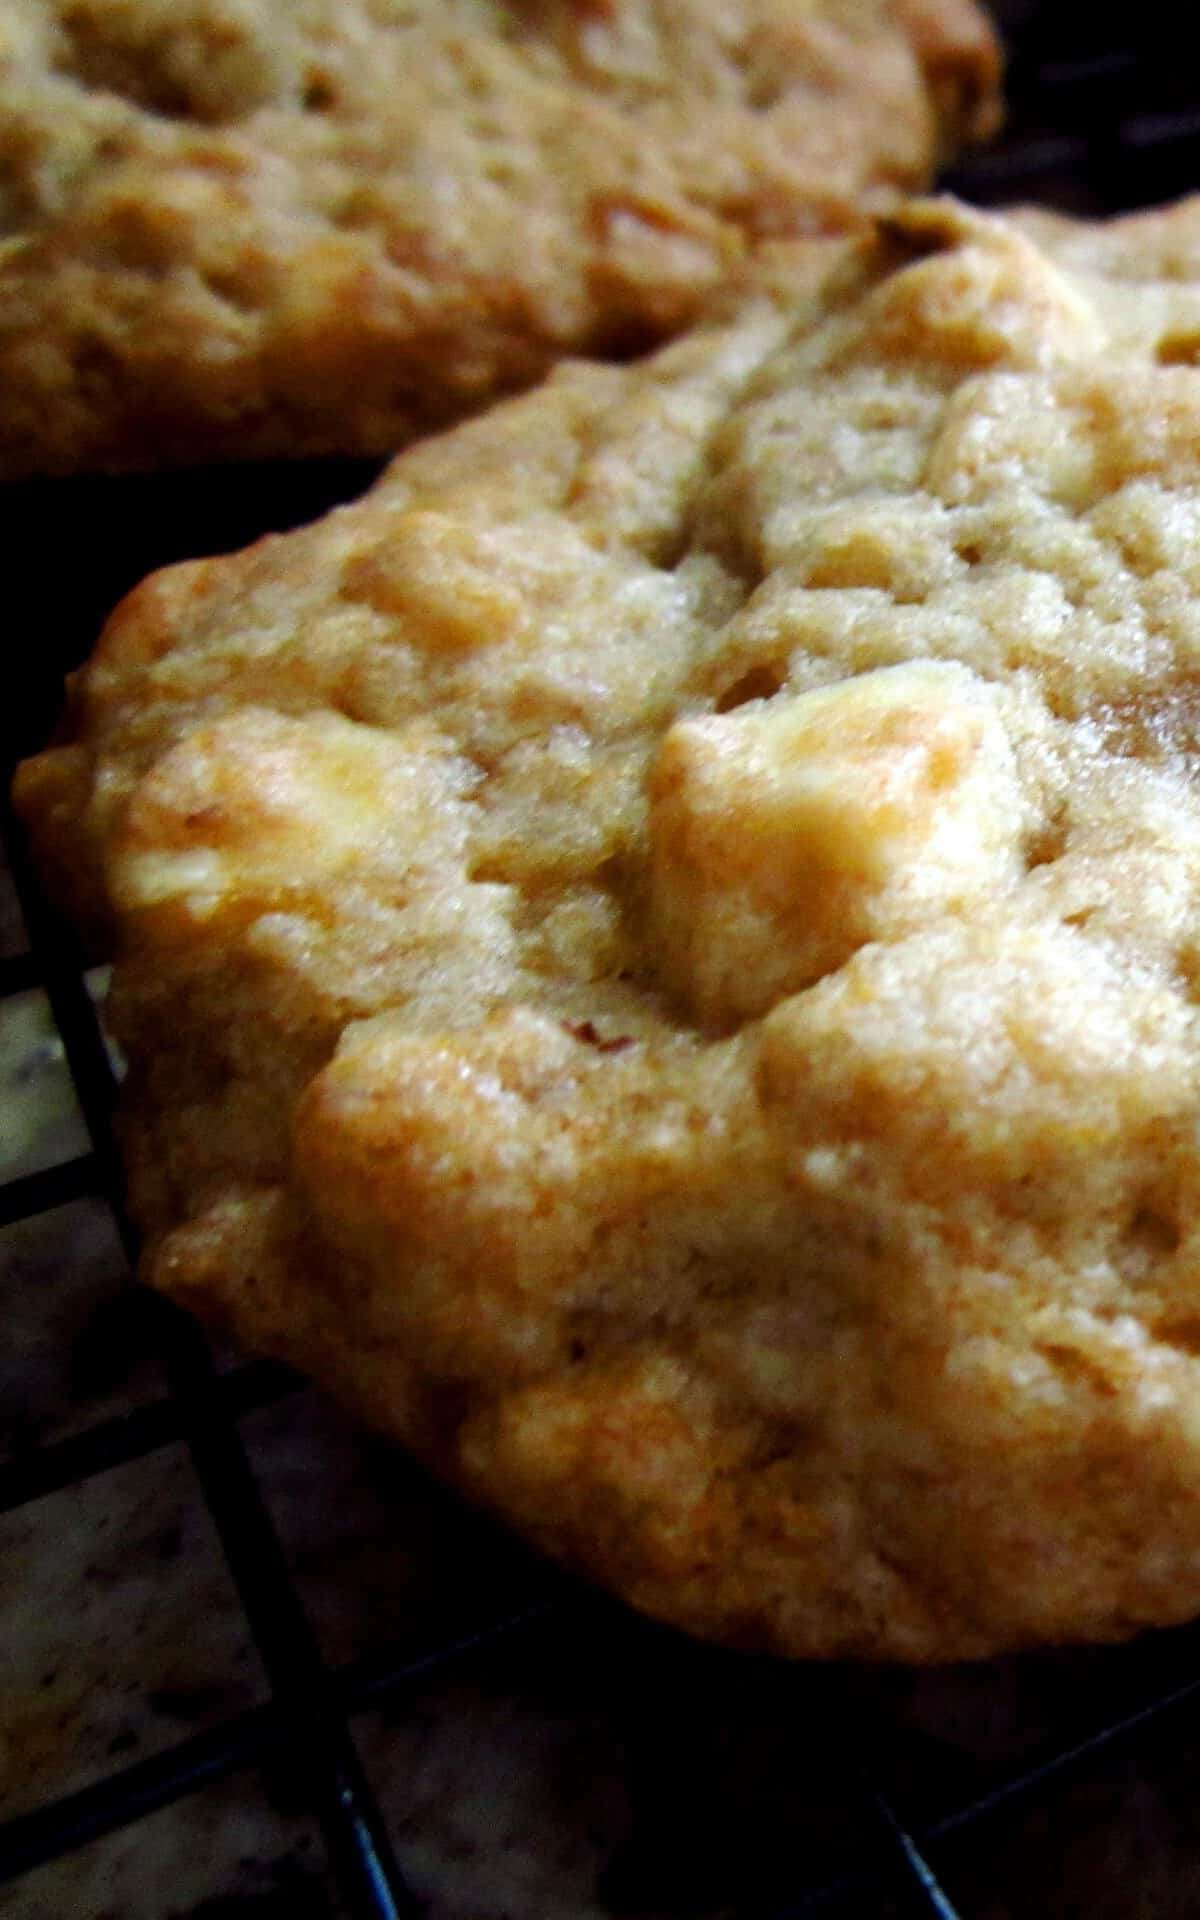  A batch of warm and gooey banana nut cookies fresh out of the oven.